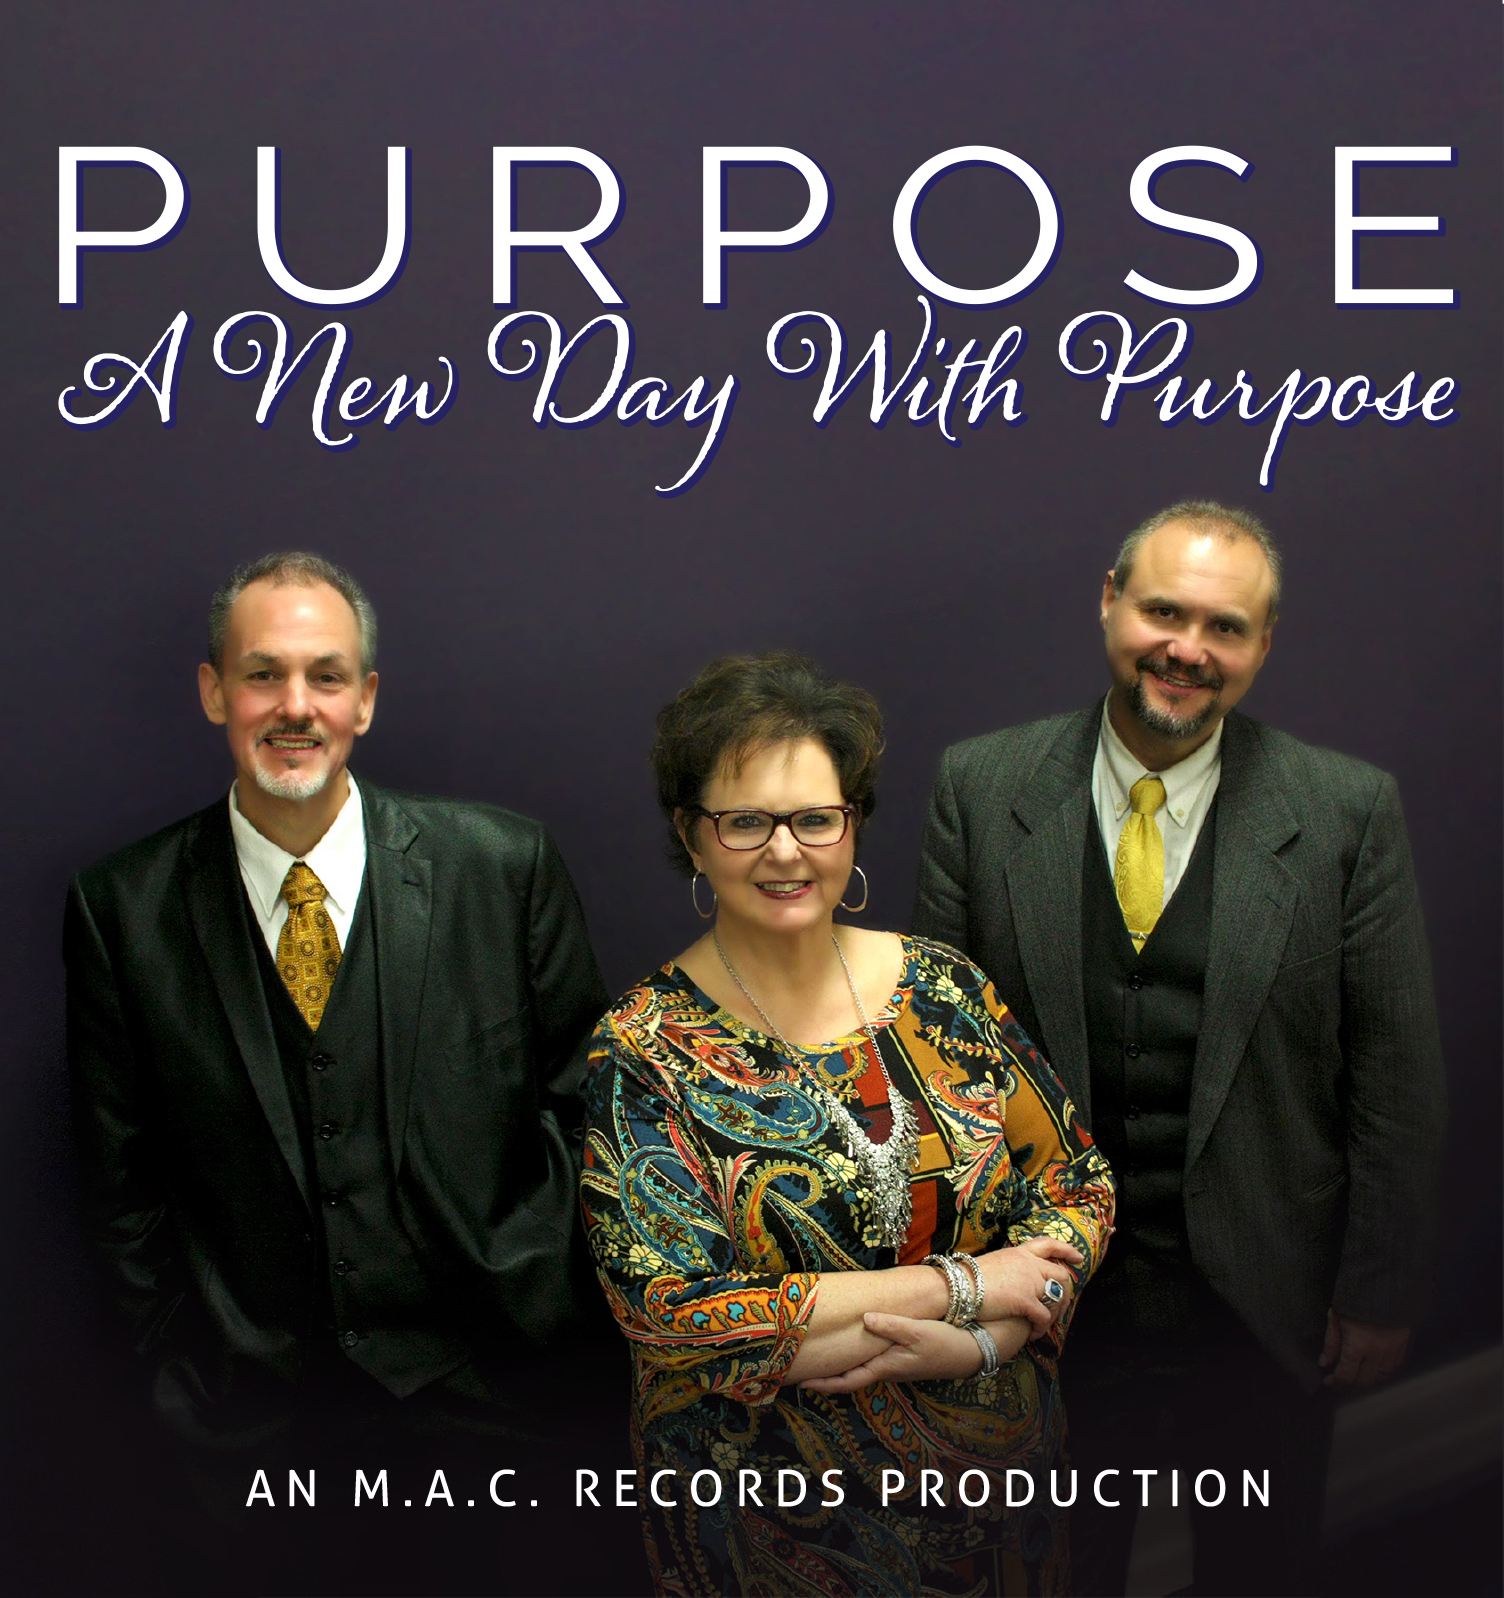 Purpose Joins M.A.C. Records & Releases New Project